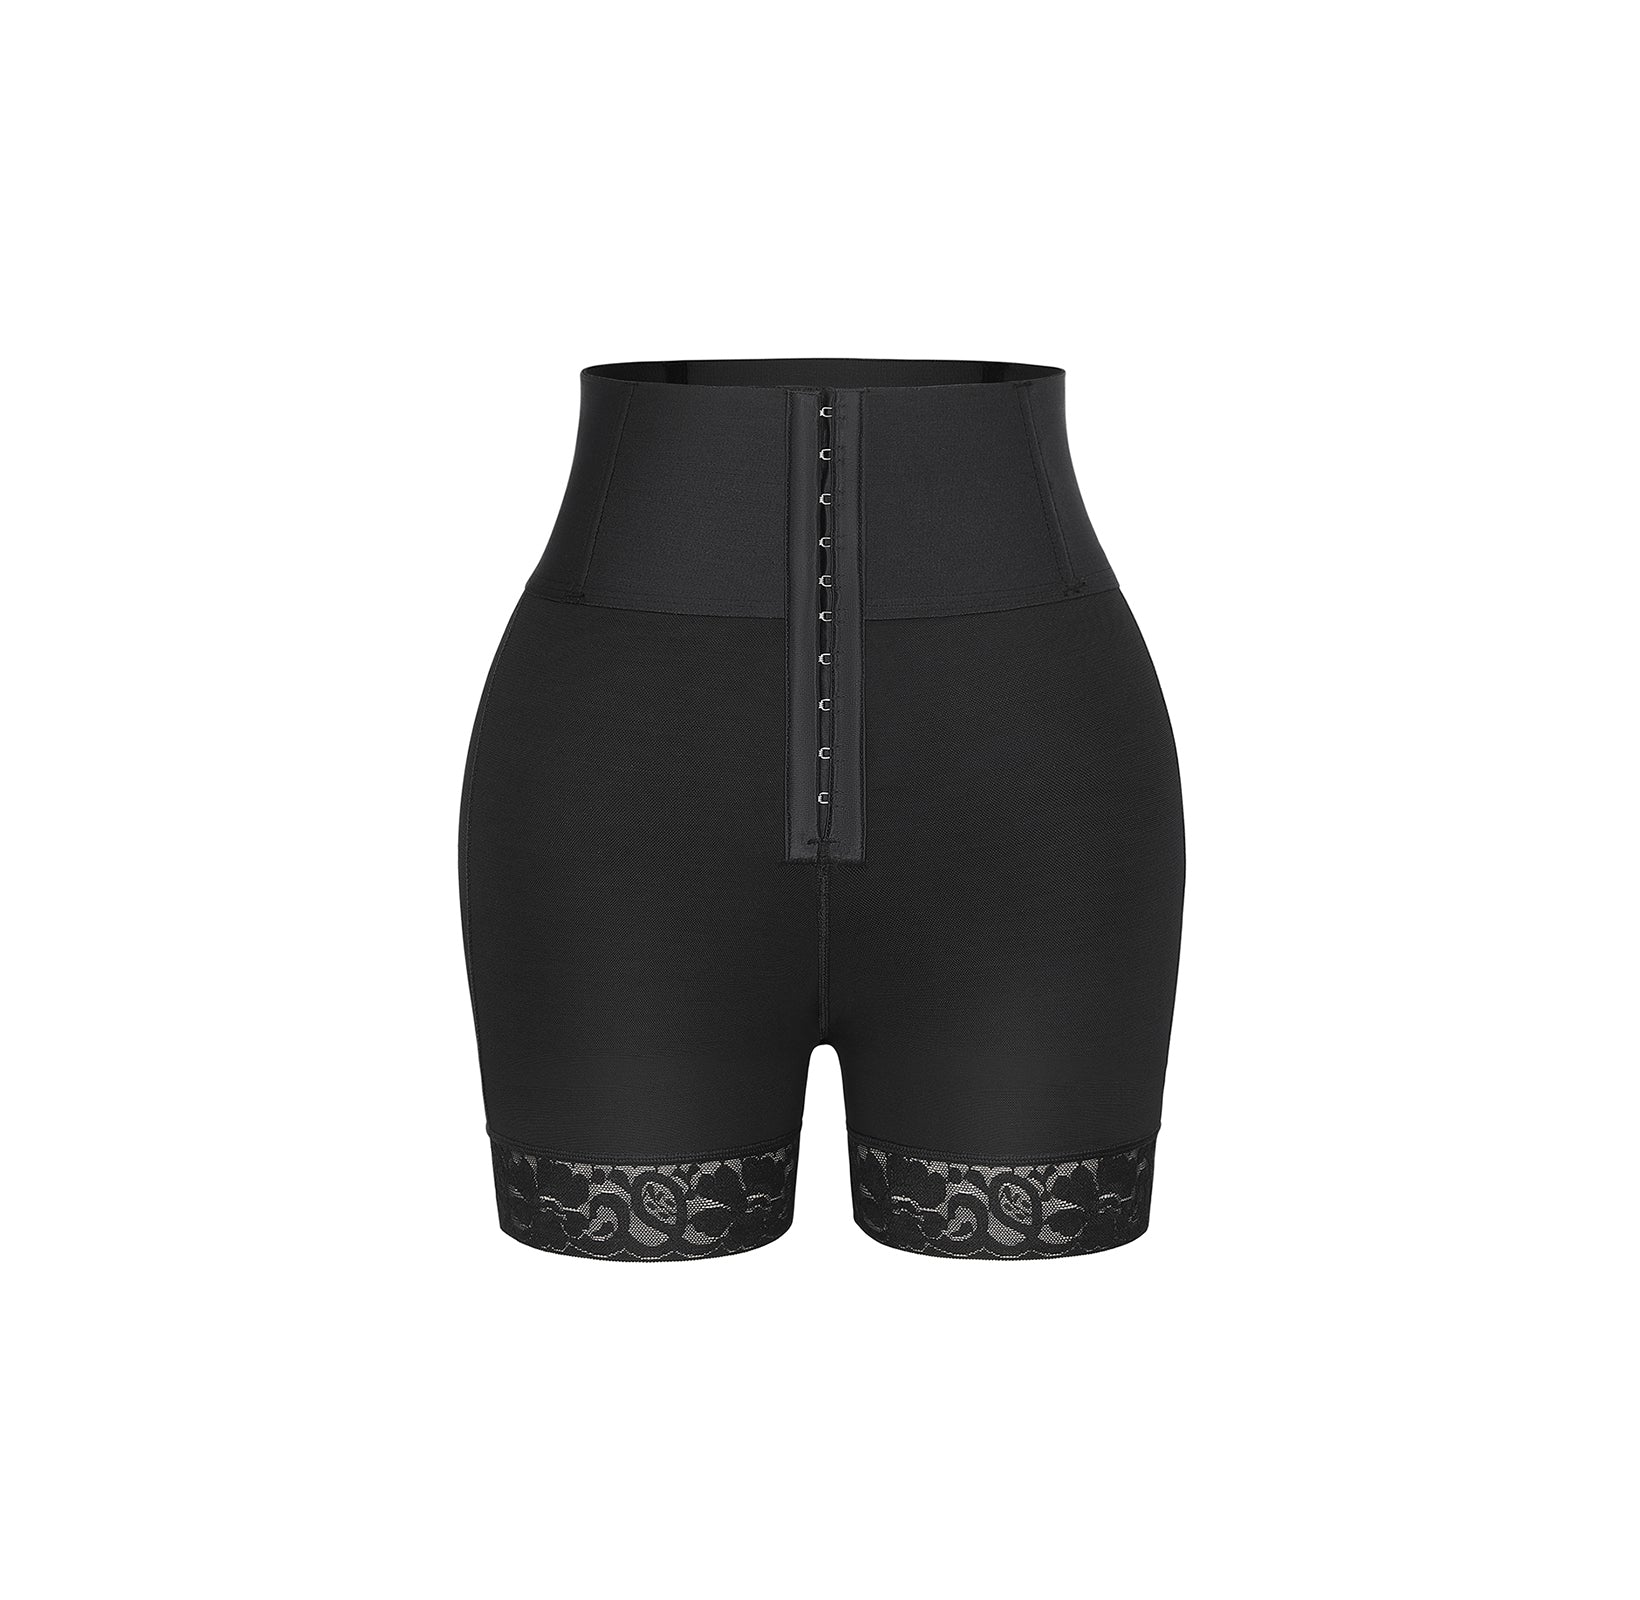 Shaping Panties Mid-Thigh Short - Compression Shapewear - Product